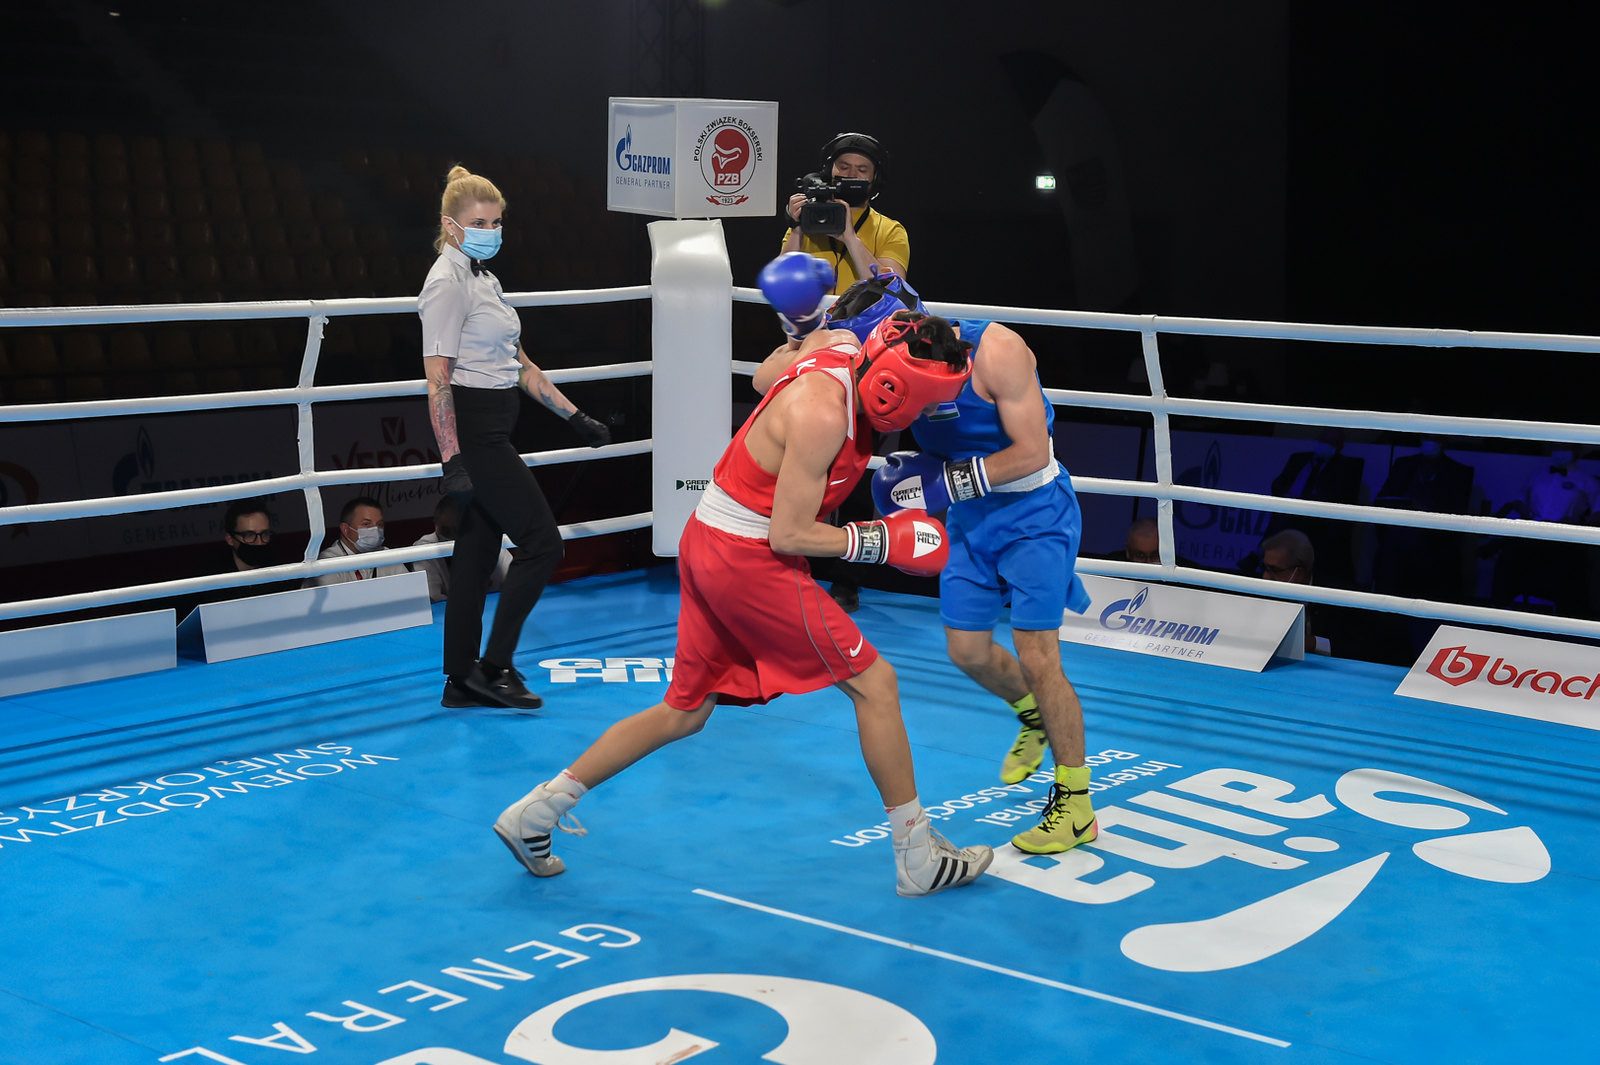 More than 400 boxers from 52 countries are due to compete at the Championships ©AIBA